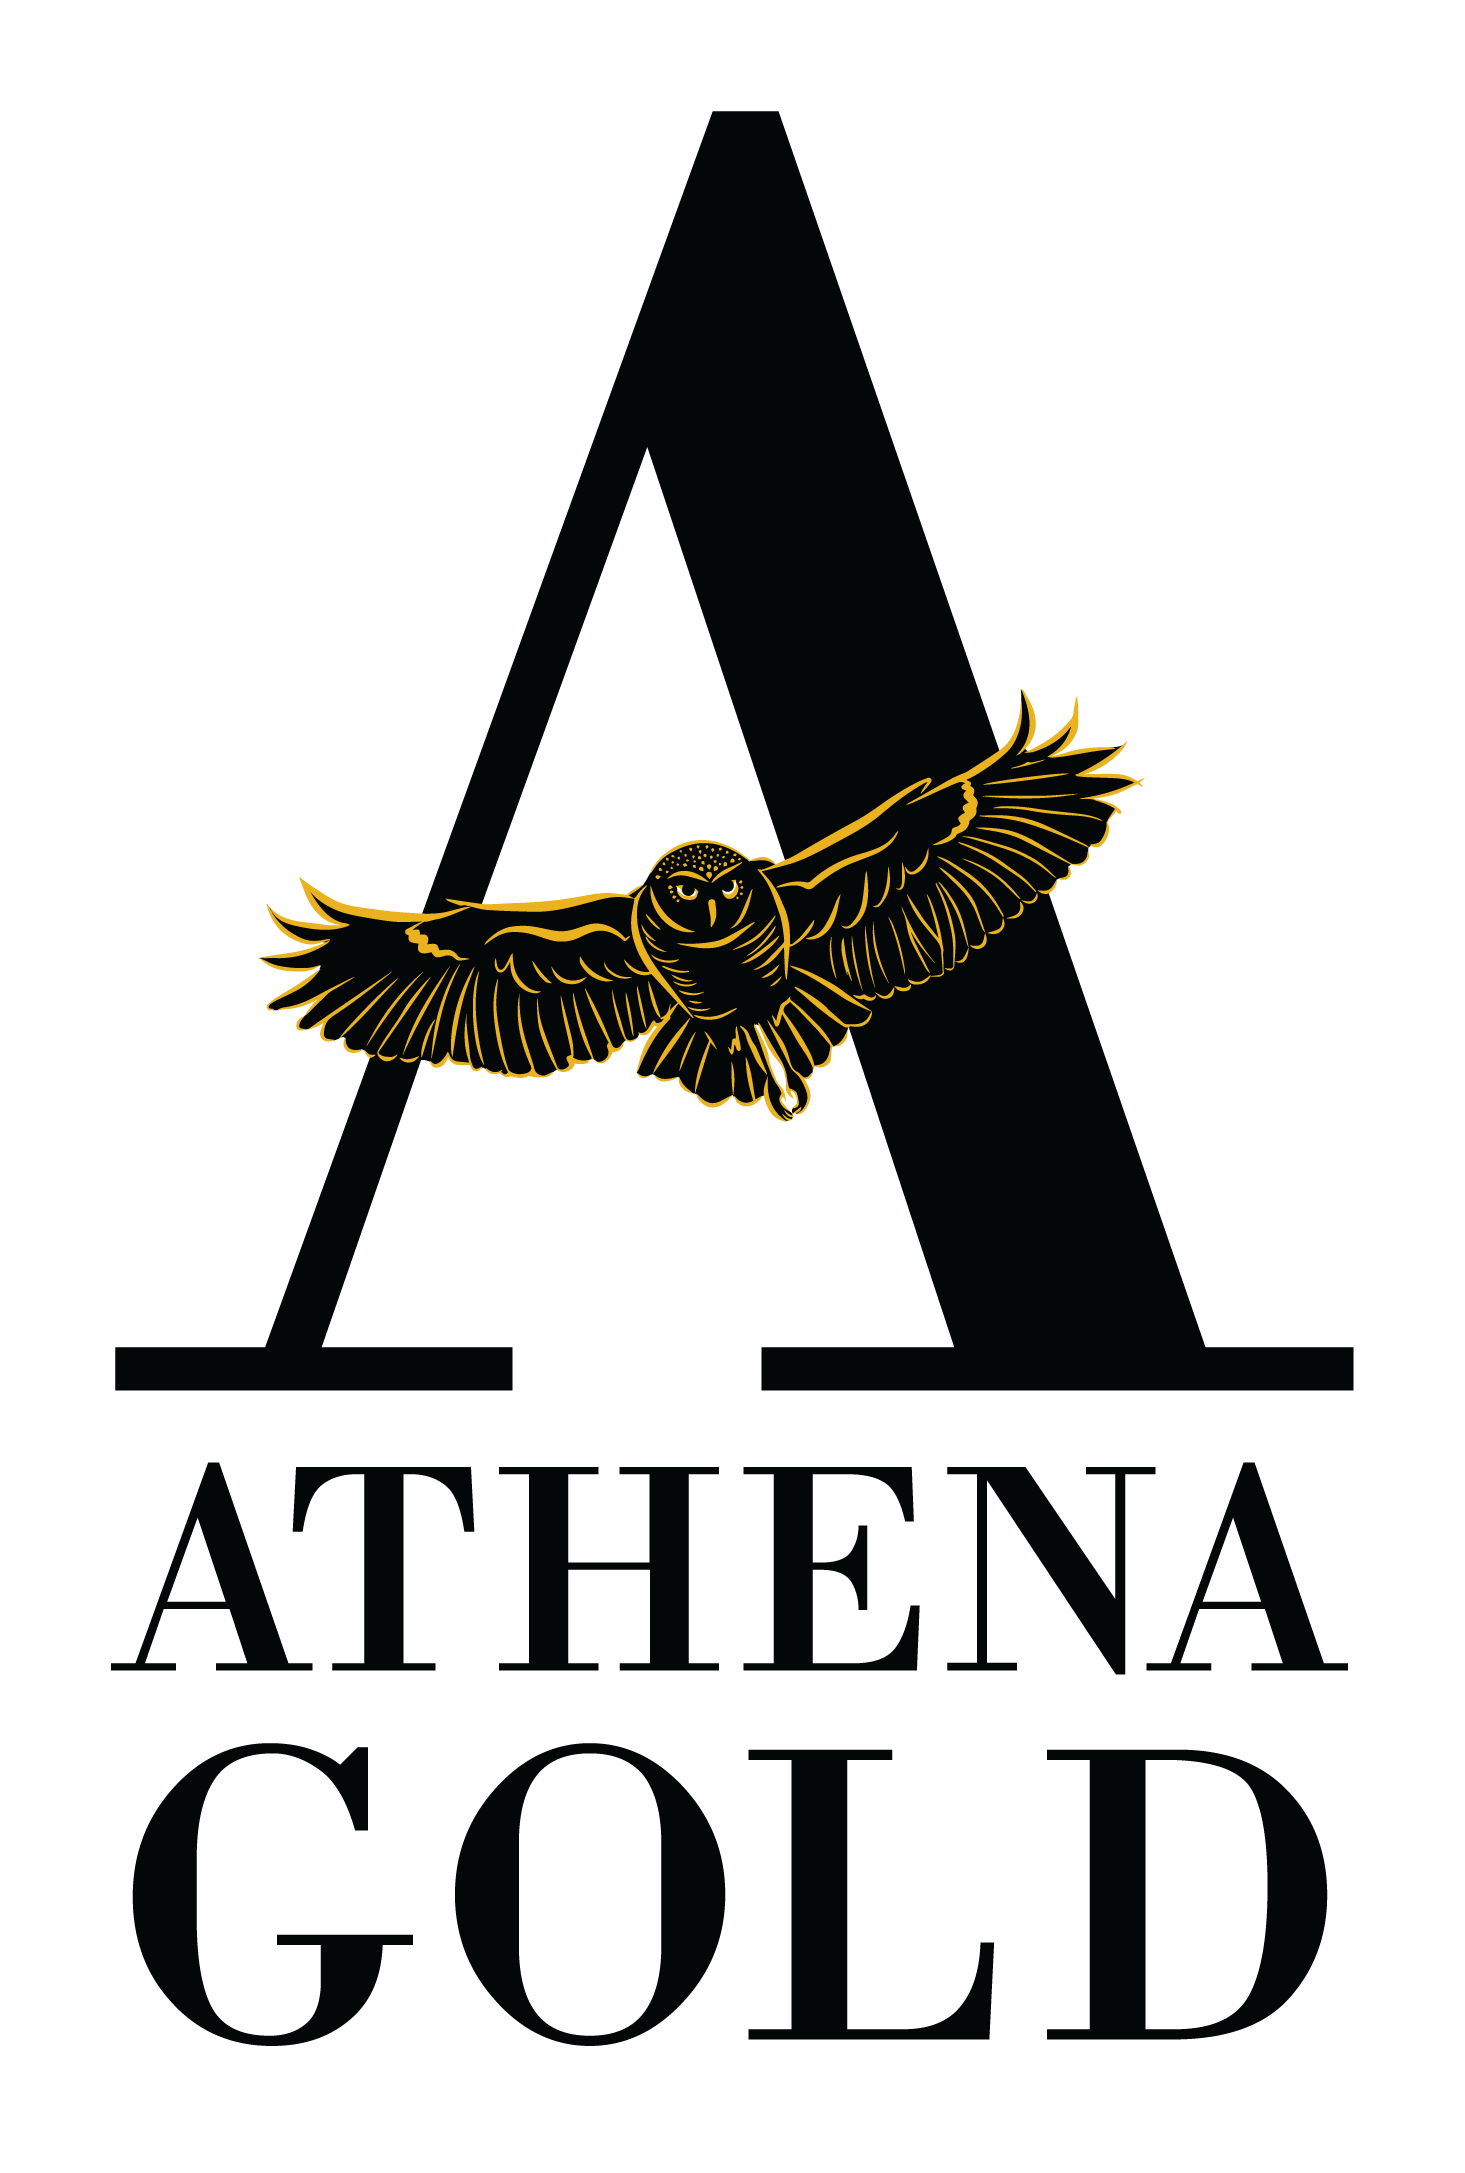 Athena Gold Corporation, Friday, September 9, 2022, Press release picture